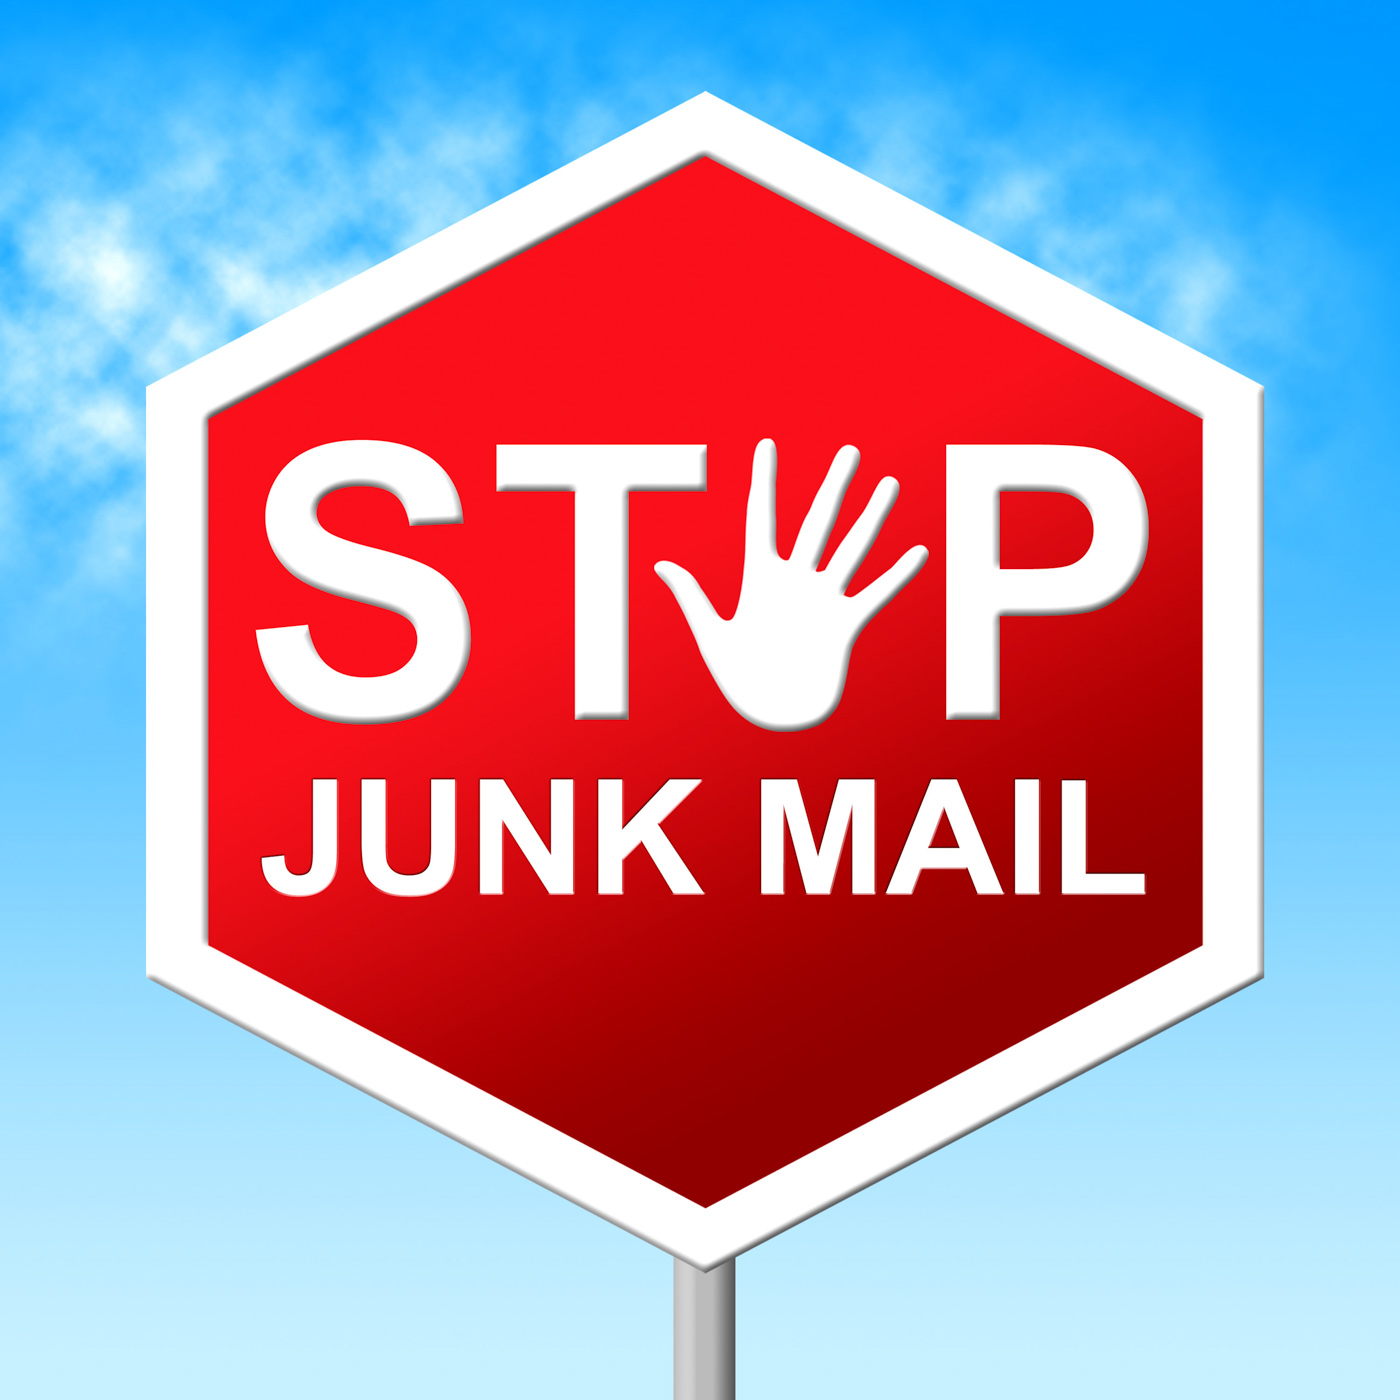 Stop junk mail shows warning sign and danger photo